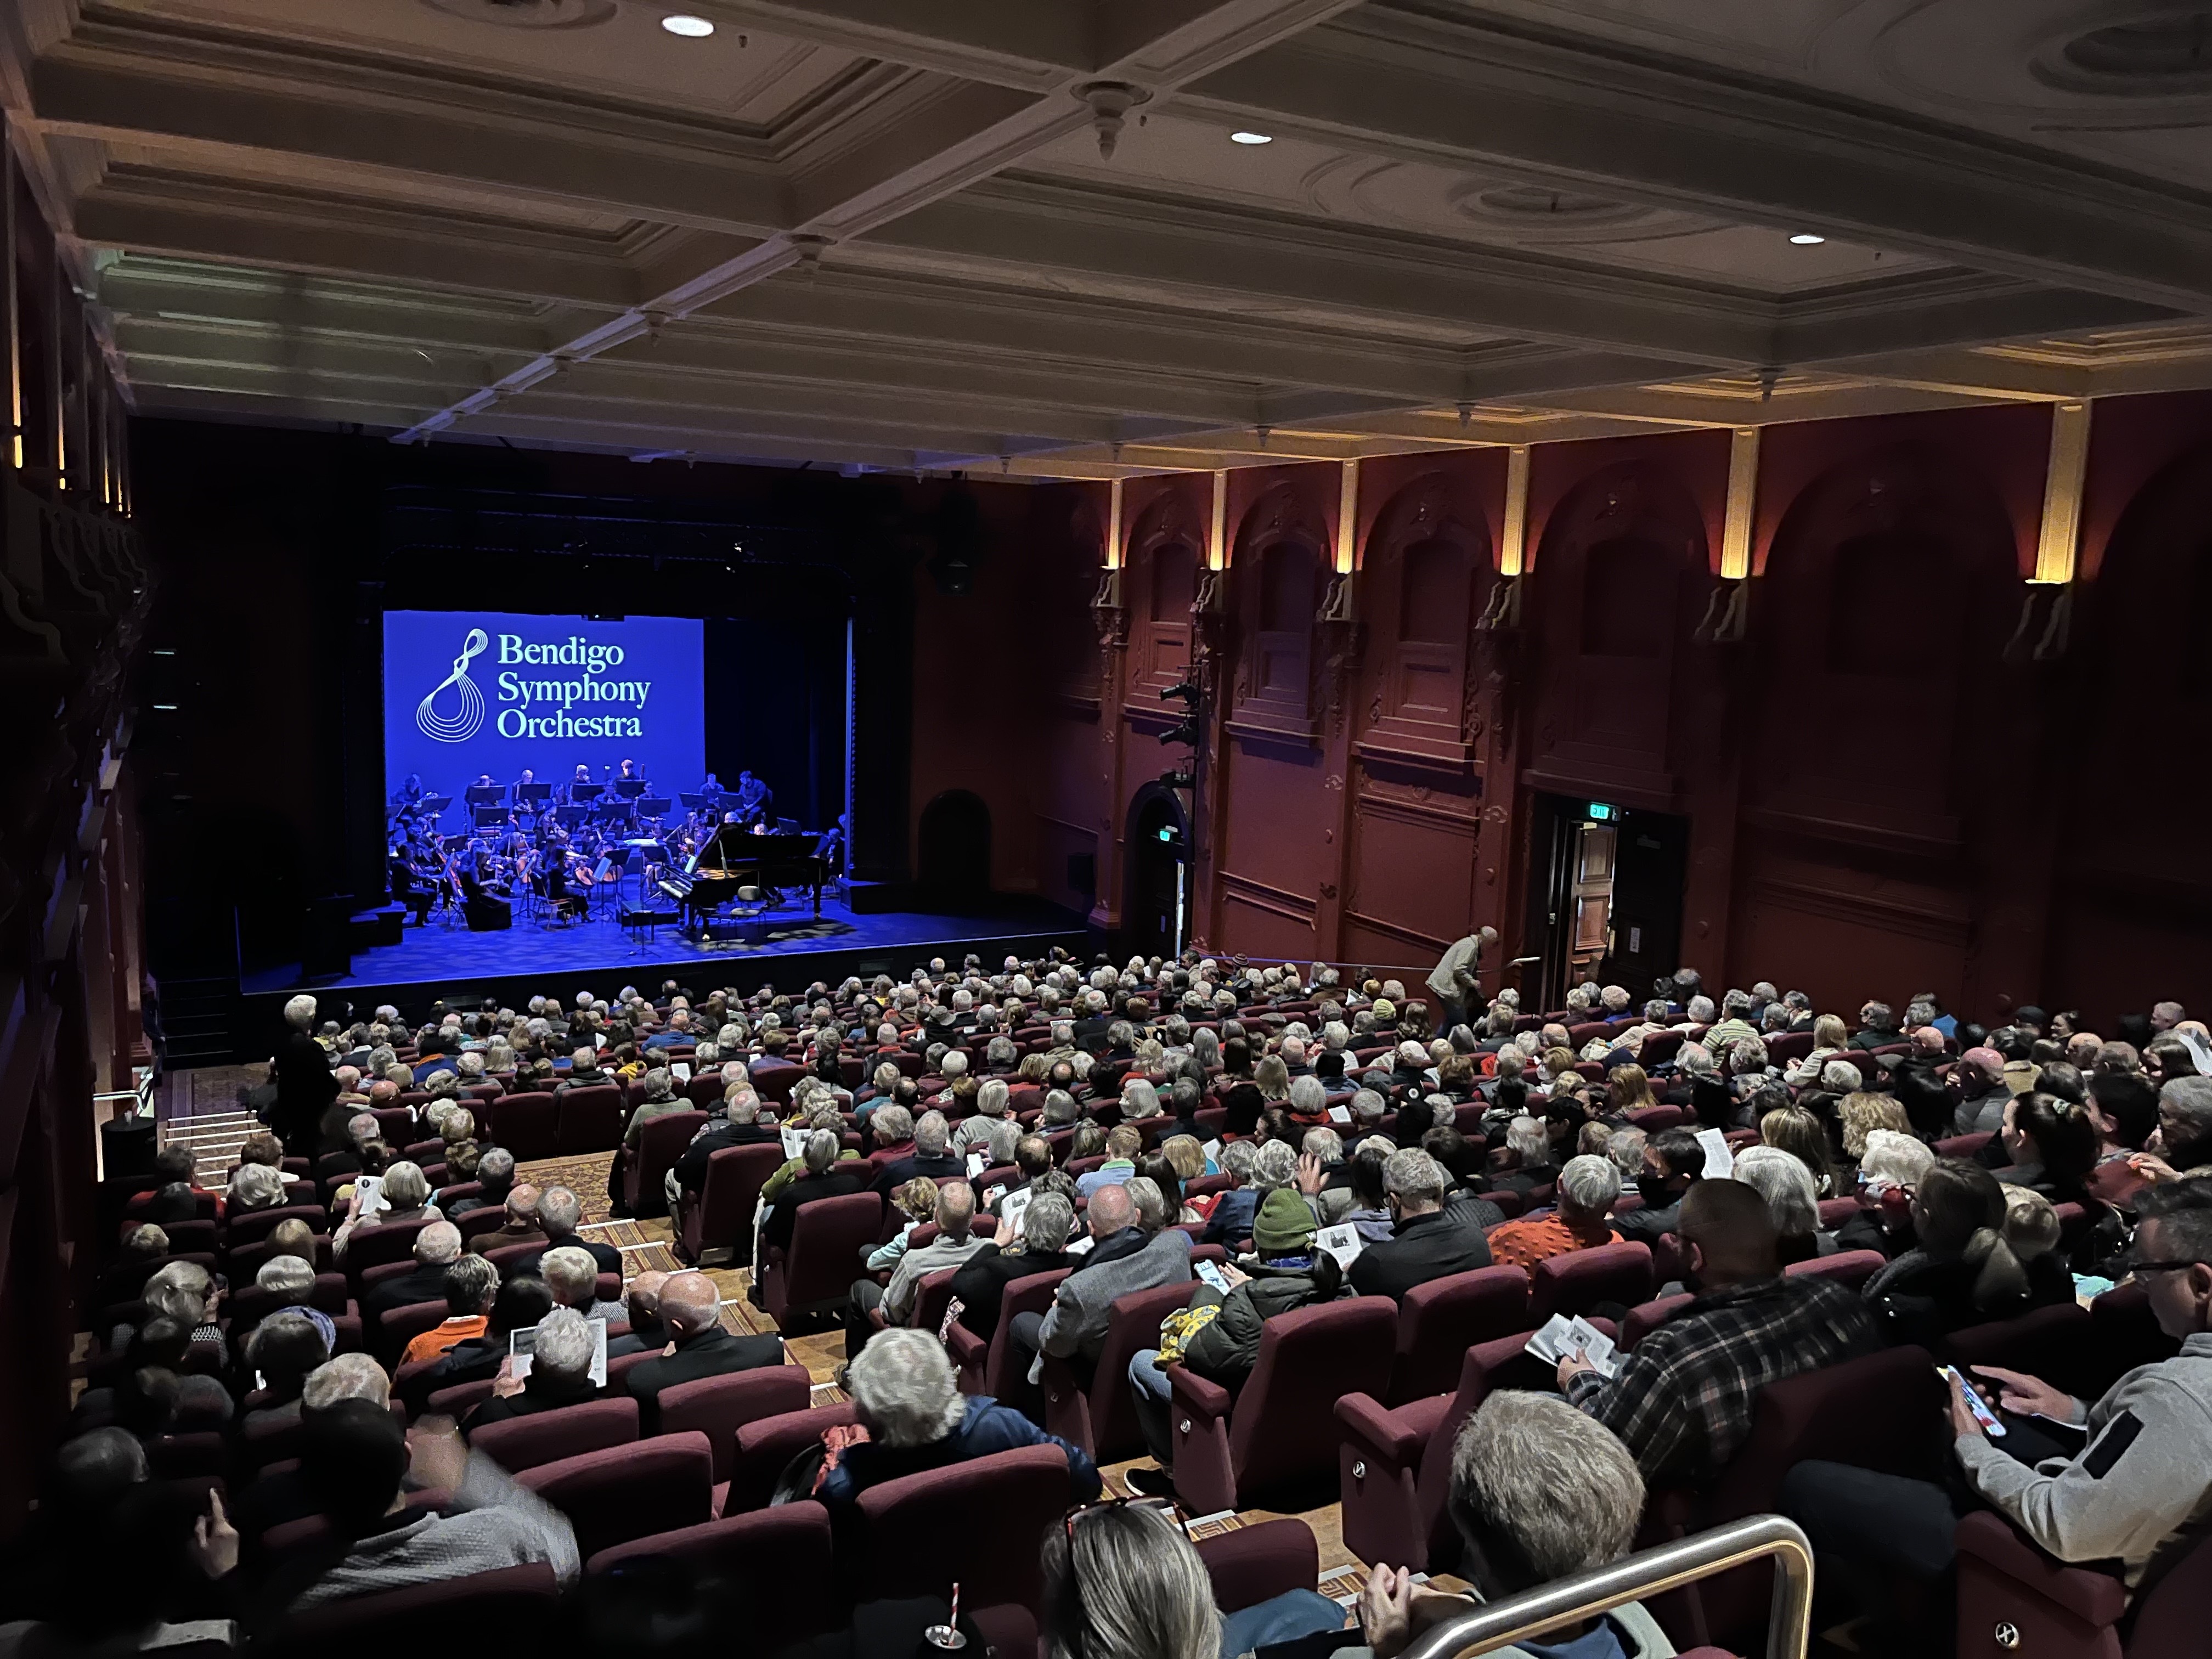 Bendigo Symphony Orchestra sells out The Capital for the first time